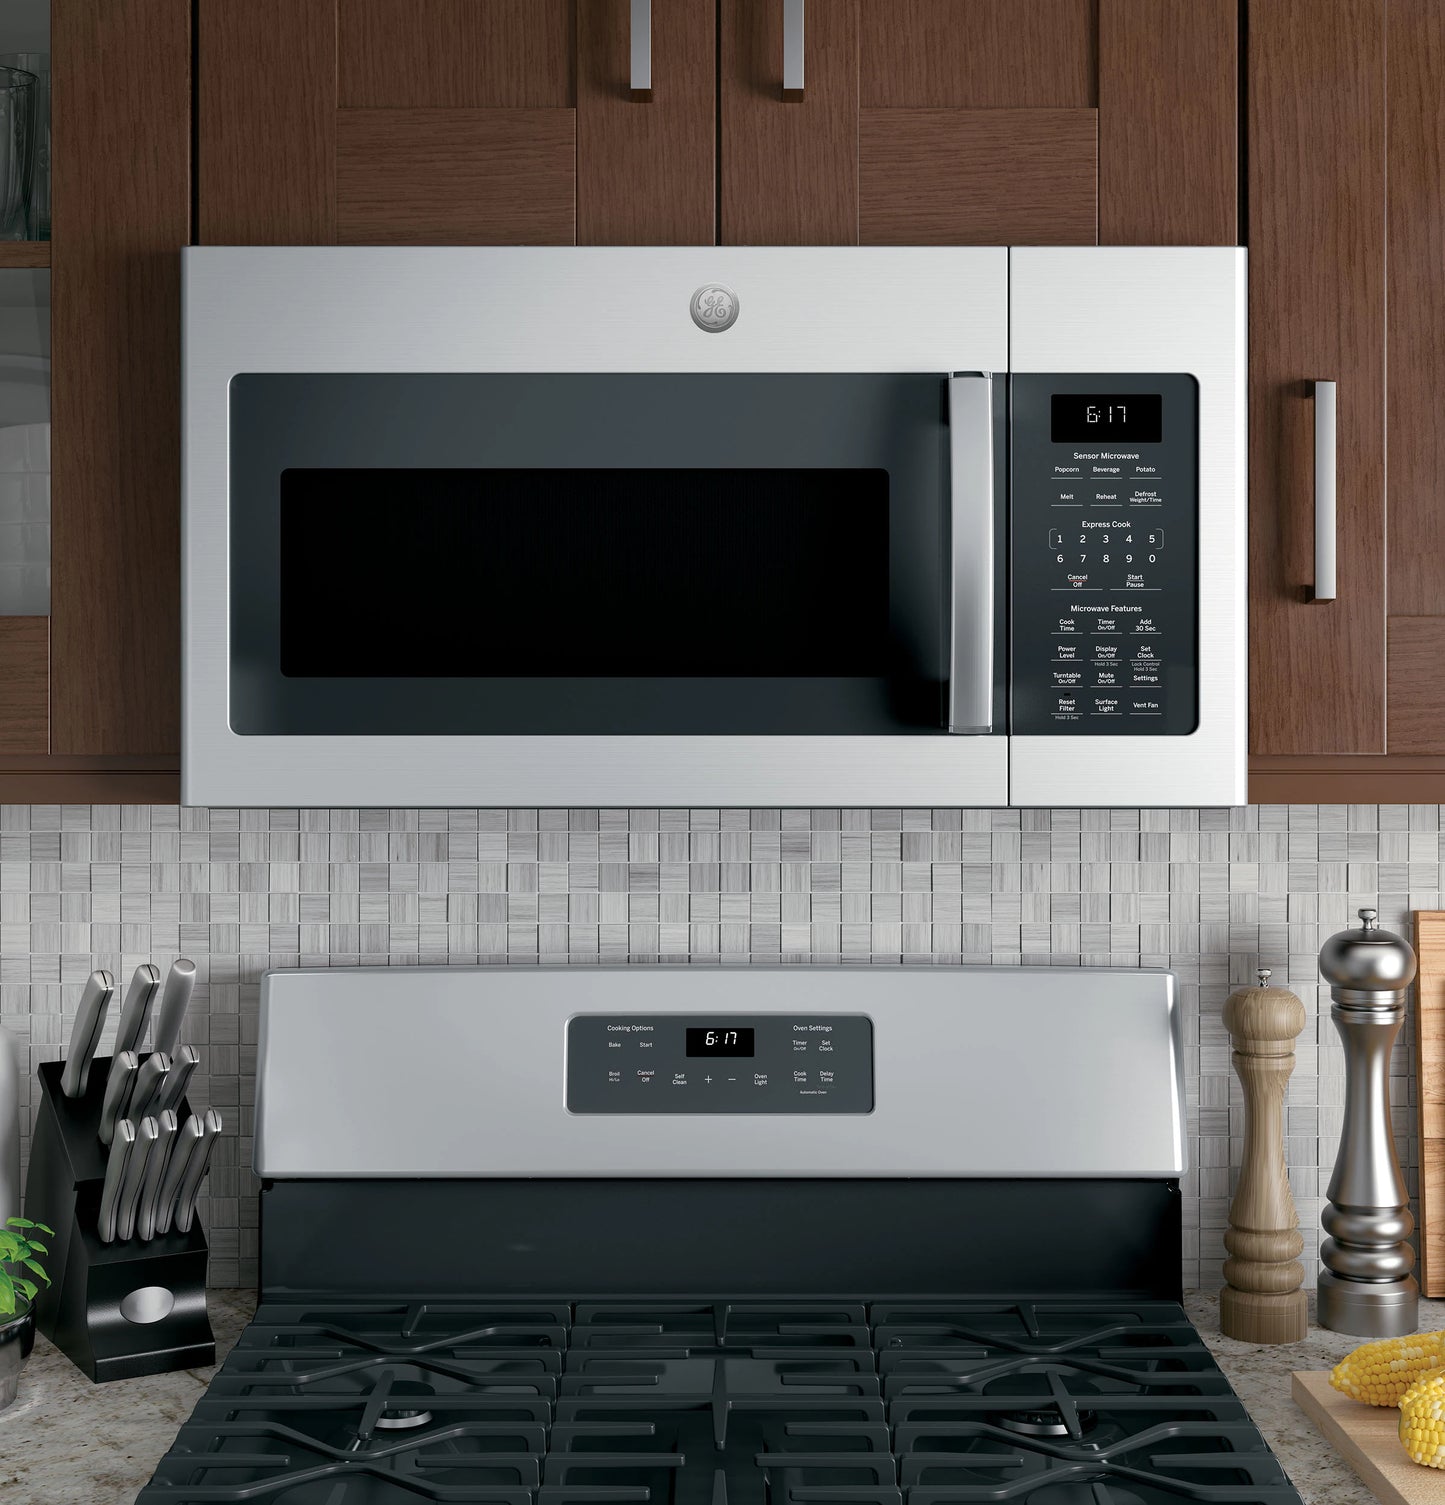 Open box GE 36-in Electric Cooktop and 30-in Smart Convection Double Wall Oven paired with 1.7 Cu Ft Over-the-Range Microwave Suite in Stainless Steel